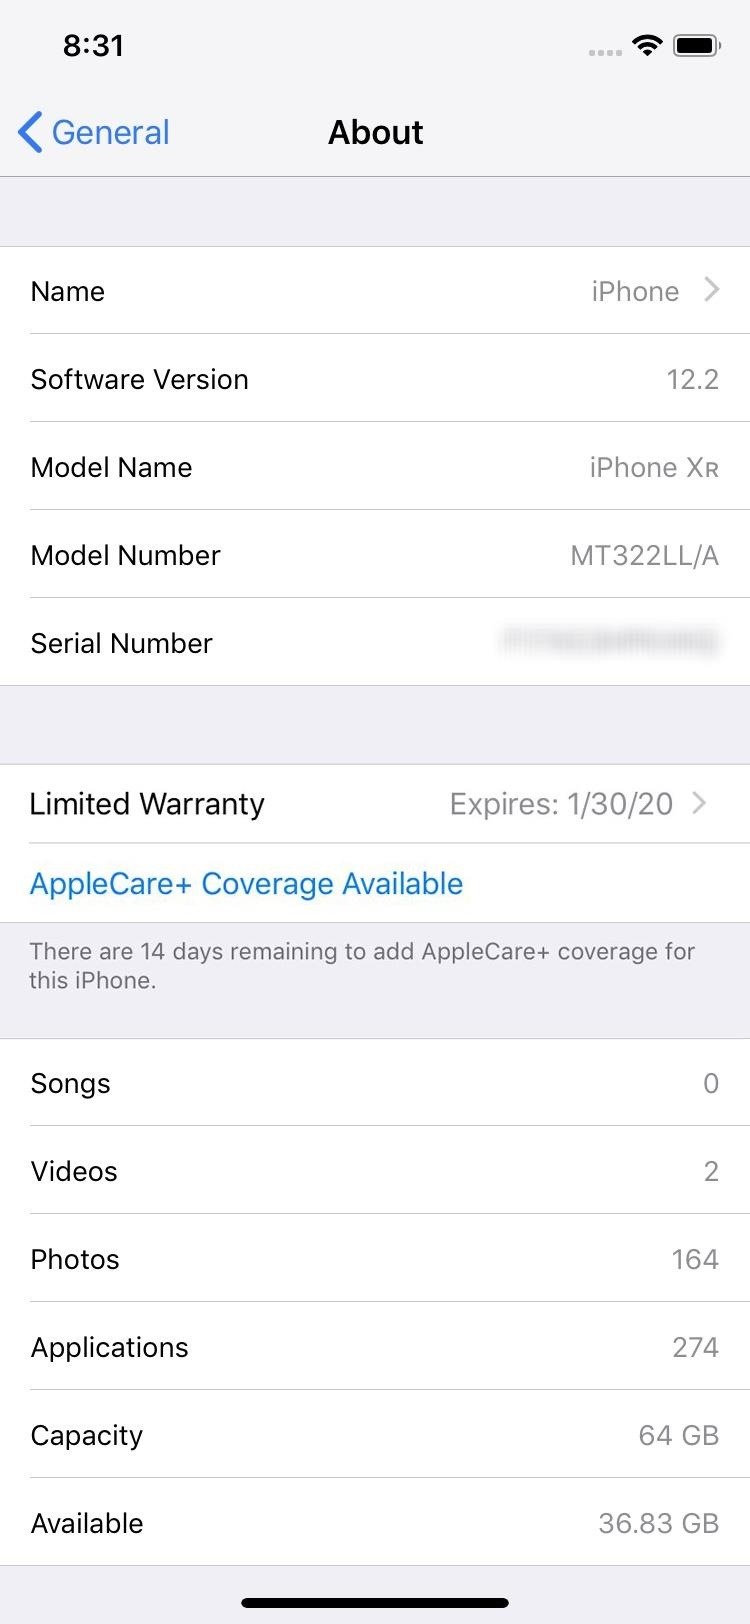 Apple's iOS 12.2 Public Beta 6 Available for iPhone, Adds New Warranty & AppleCare+ Status in Settings